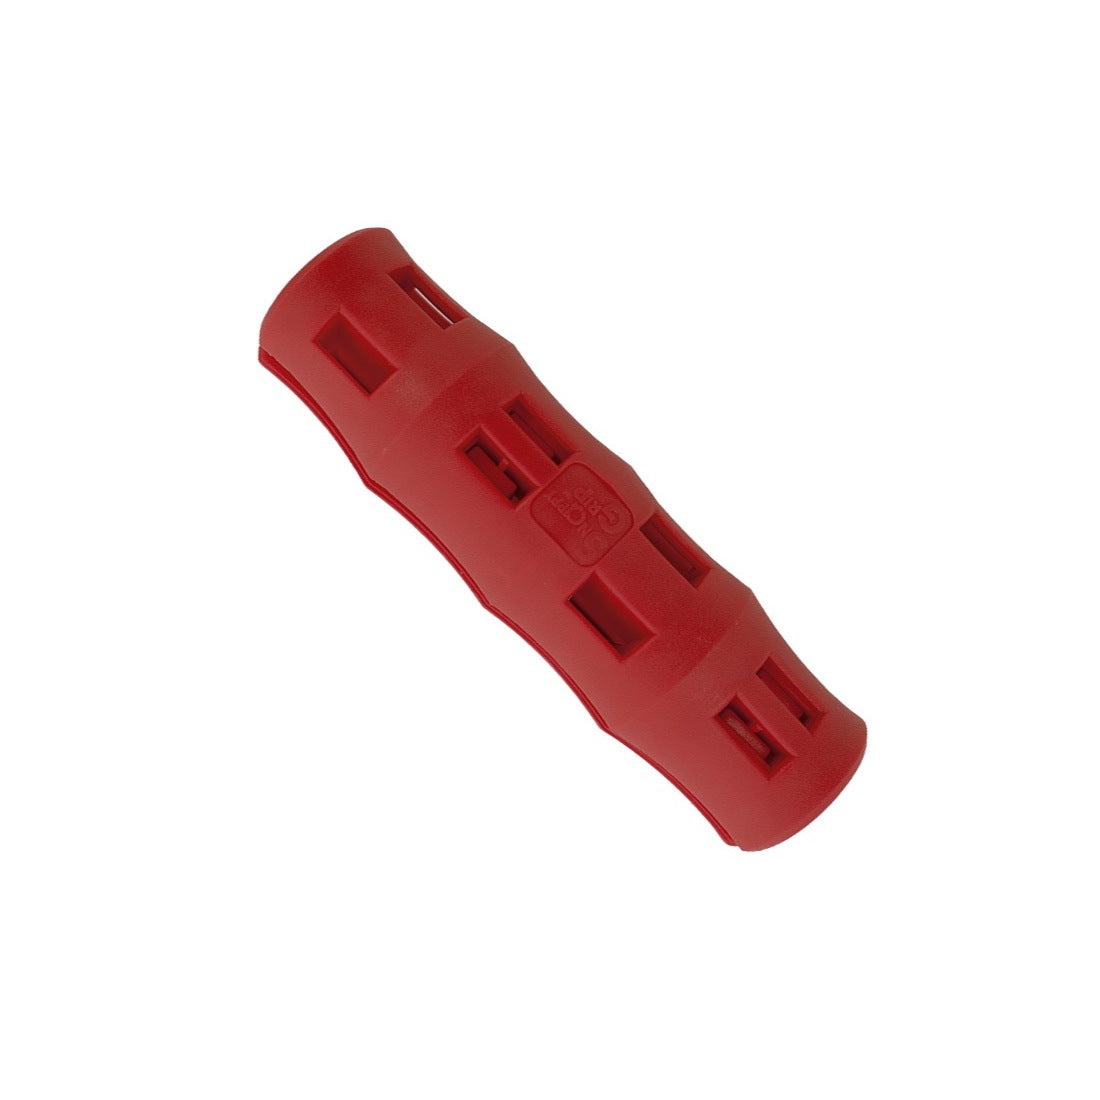 Snappy Grip Bucket Handle Red View